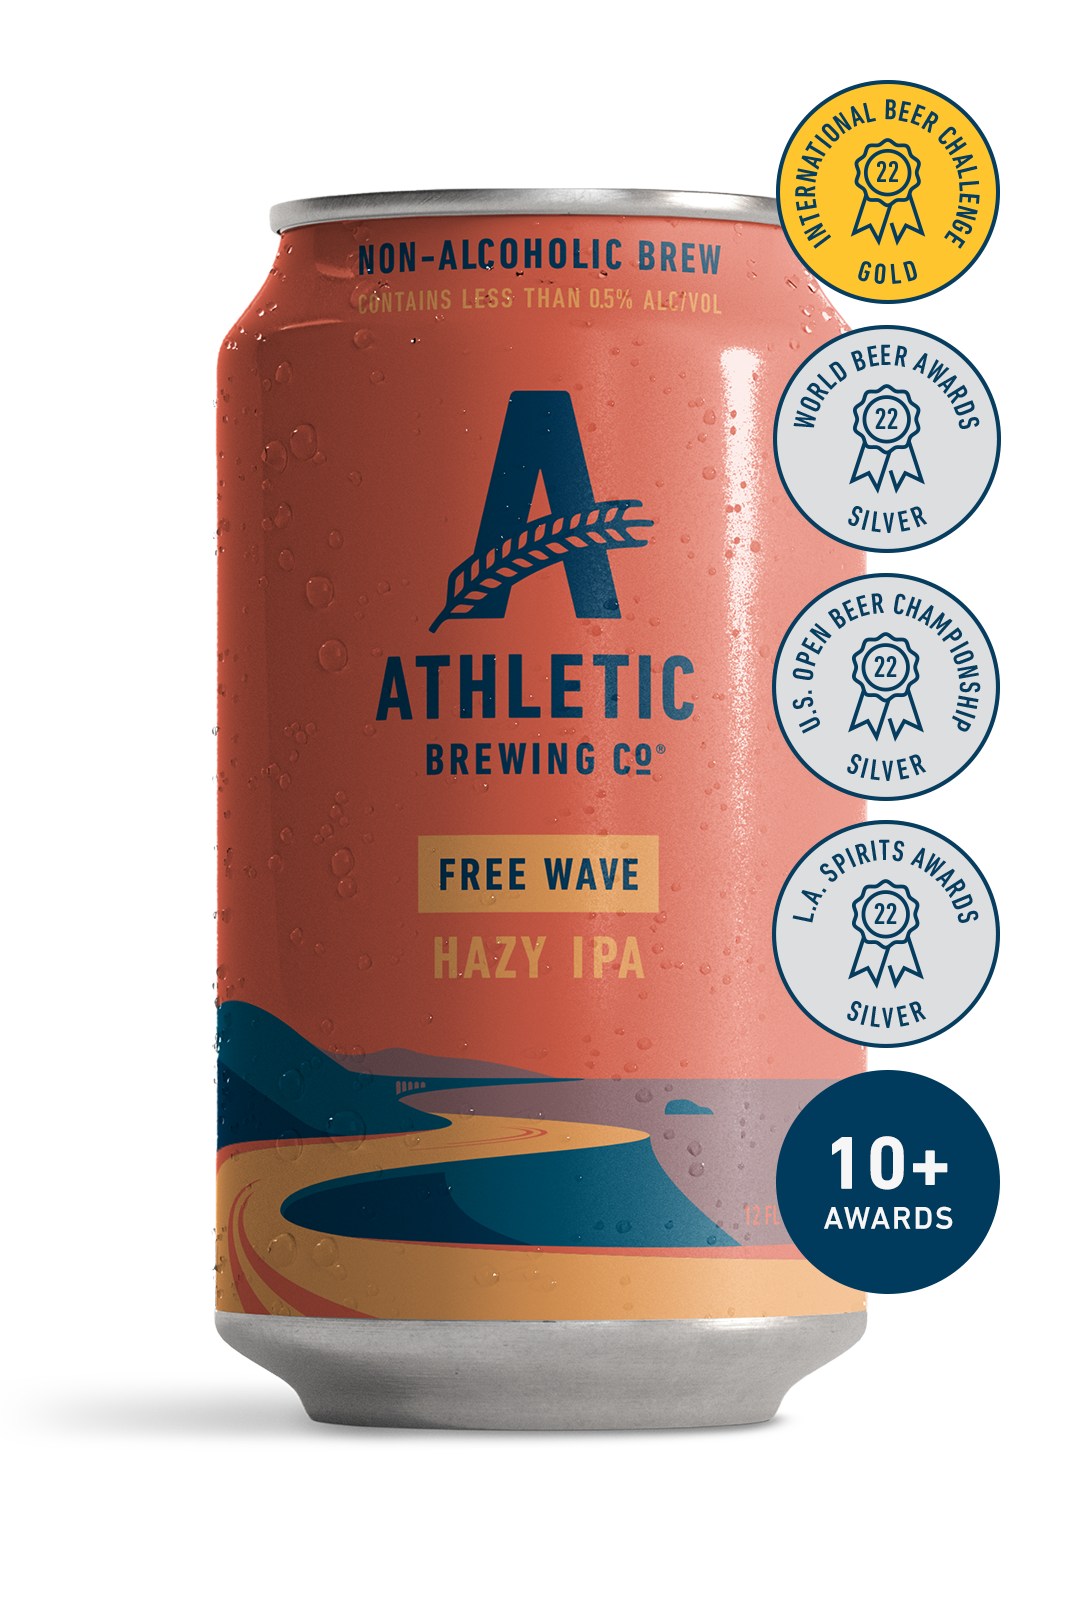 Athletic Brewing  Company - Free Wave - Hazy IPA 12oz Cans - 2x 6-Packs